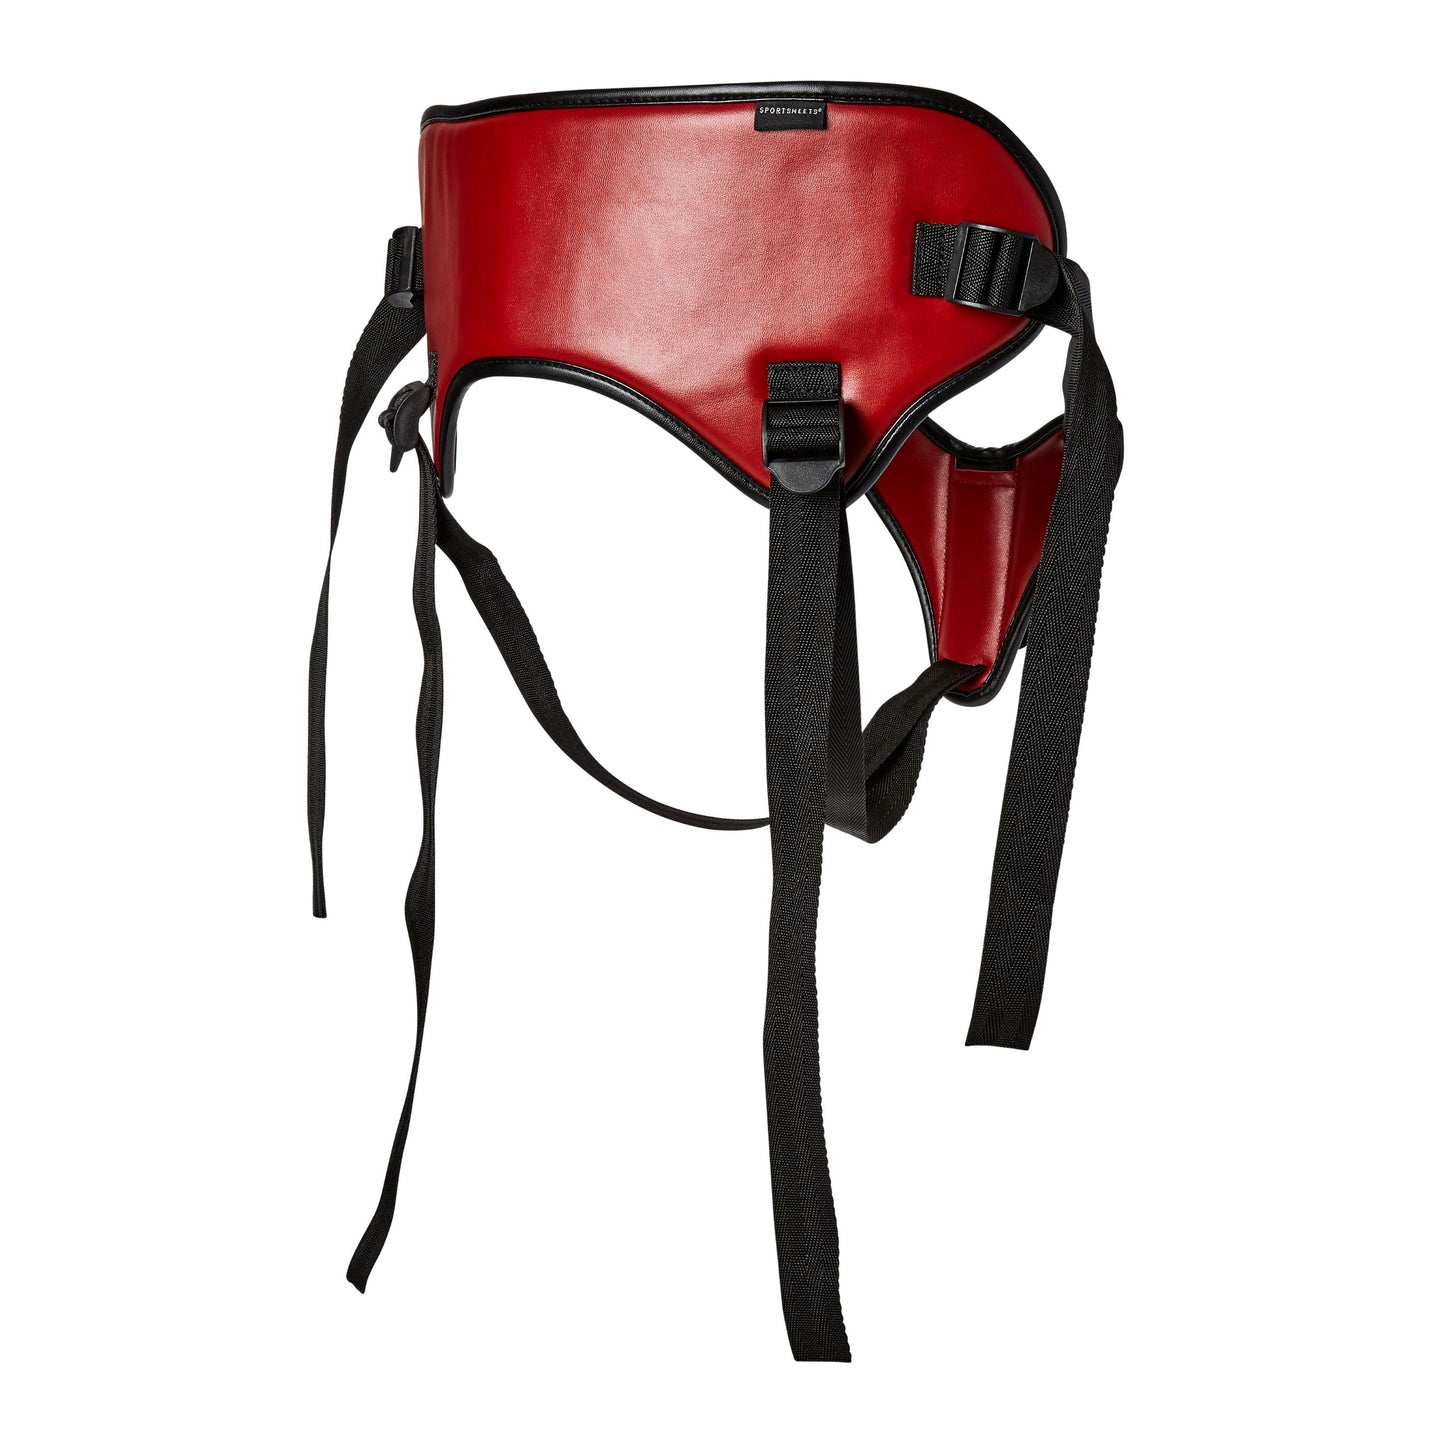 Side view of the harness that shows the width of the belt and the length of the adjustable straps.